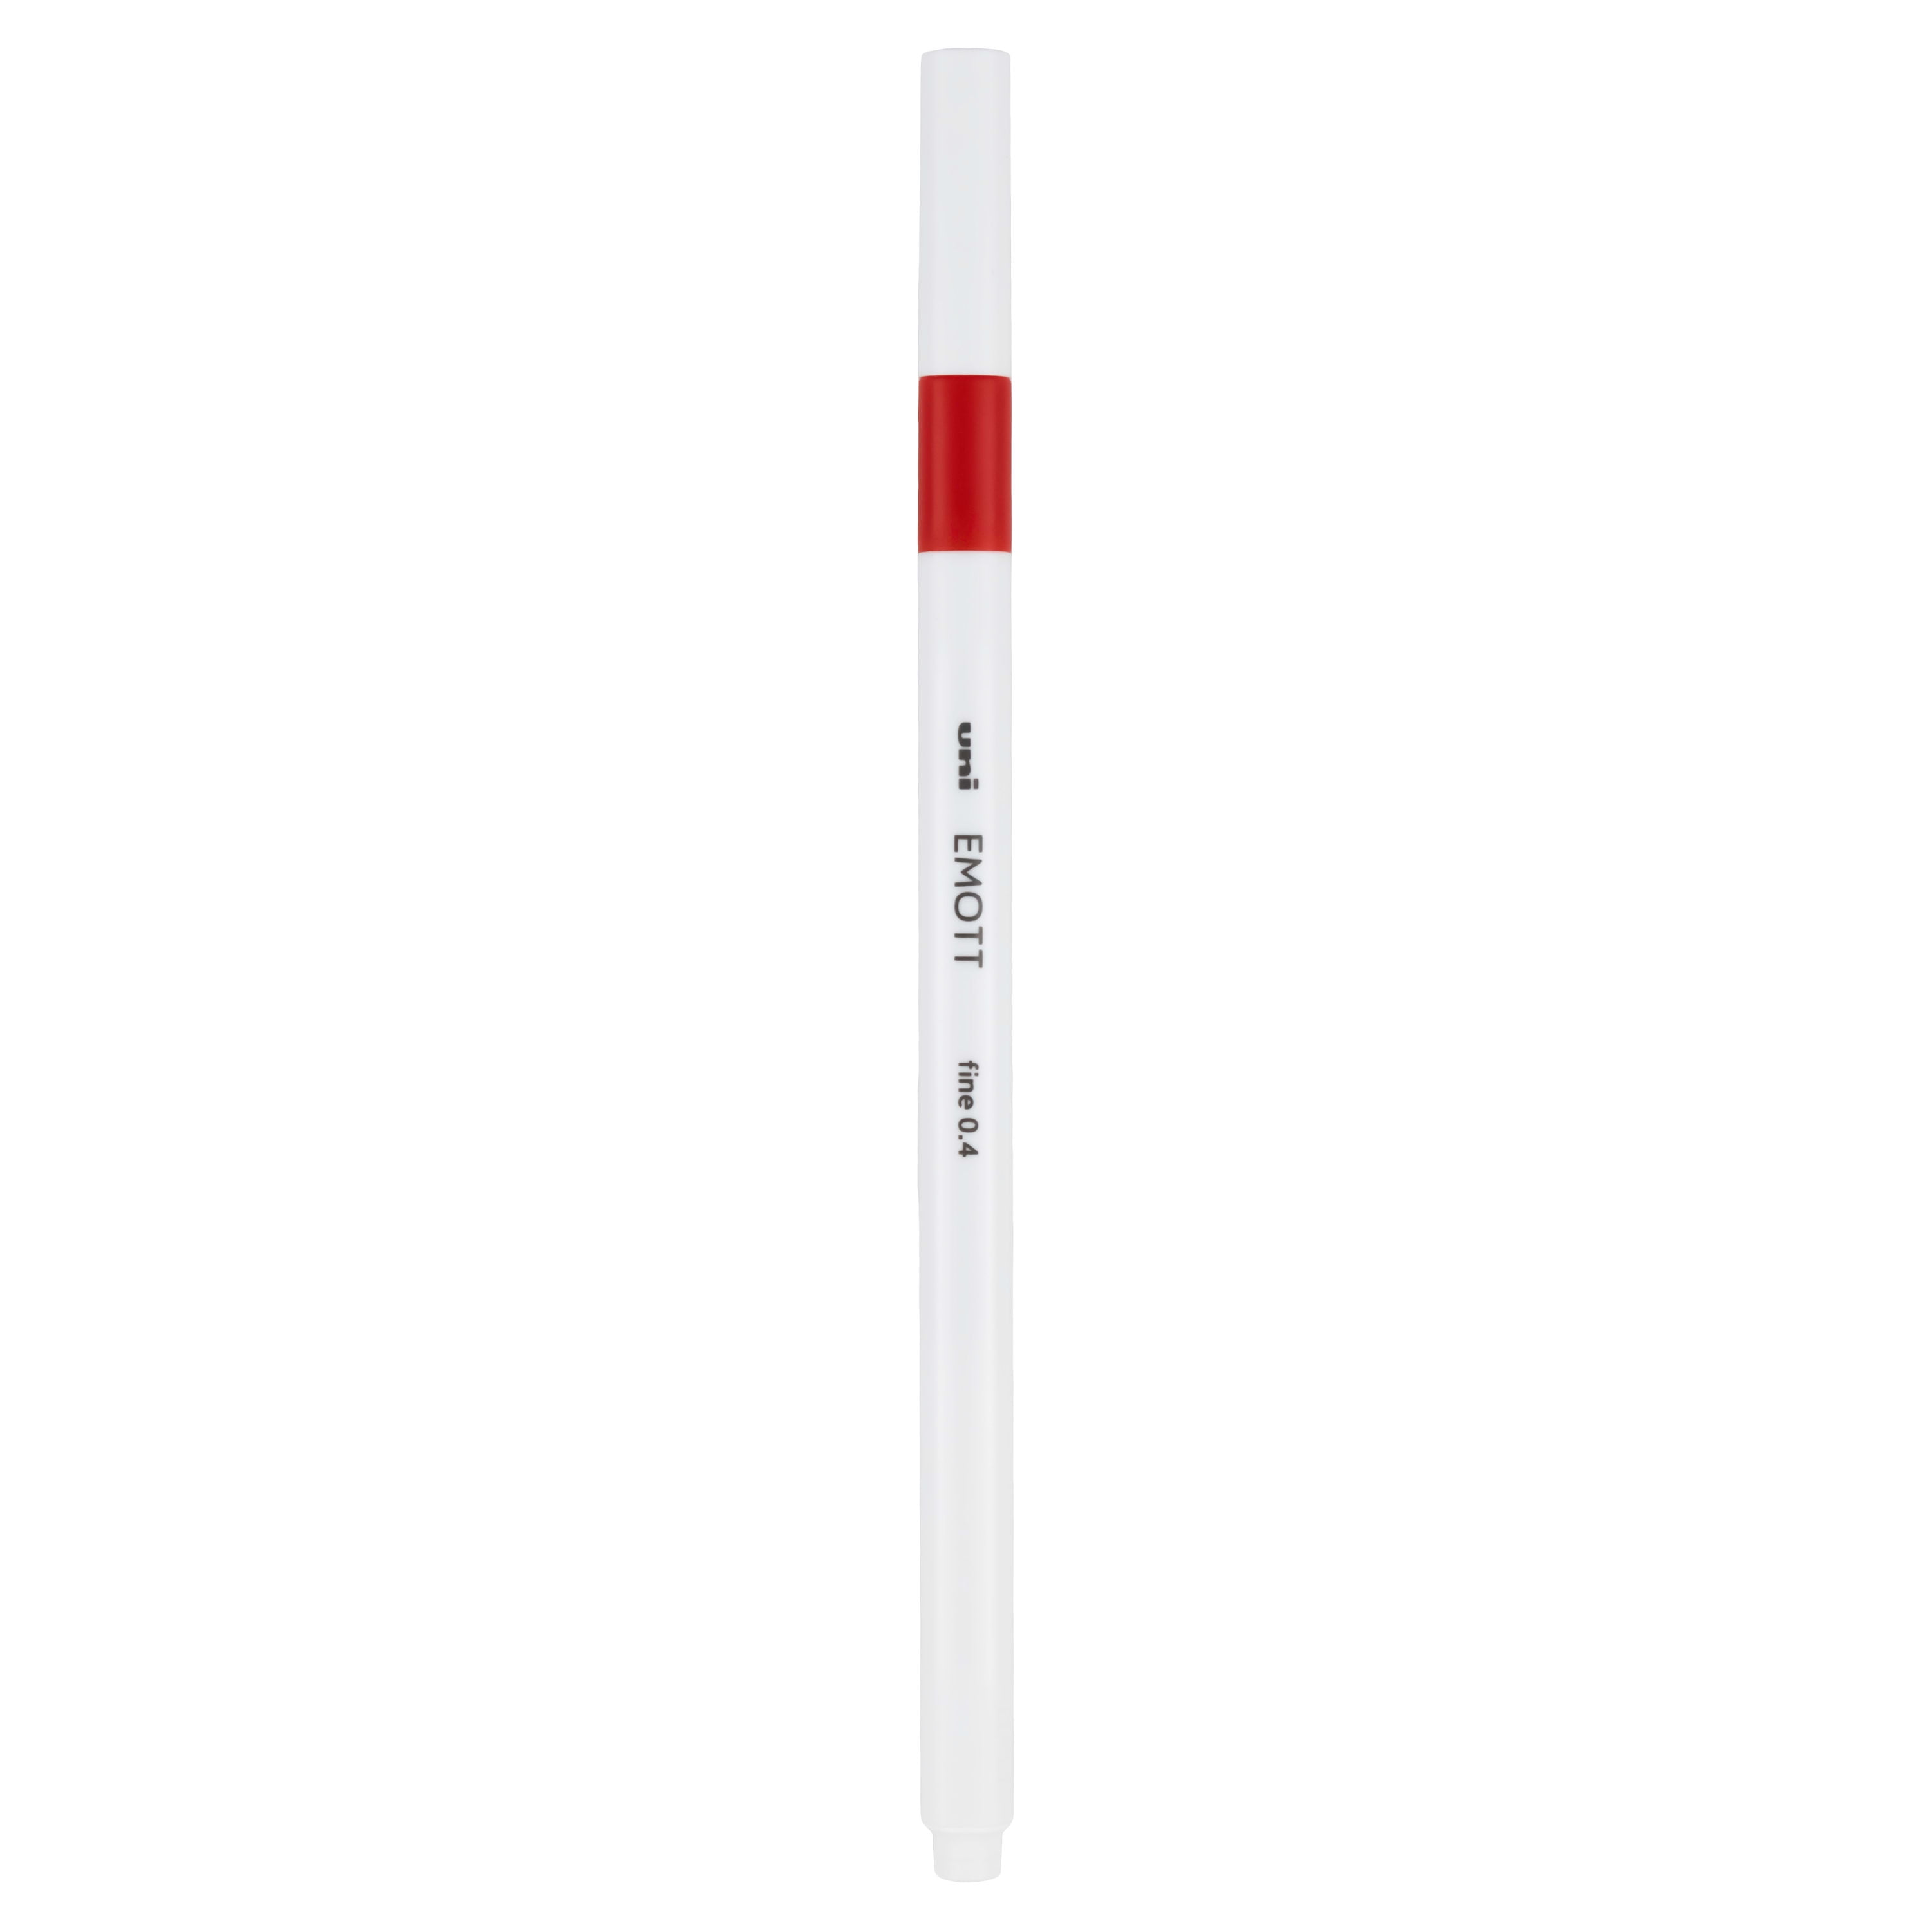 uni-ball®Emott Ever Fine Porous Point Pen, Stick, Fine 0.4 Mm, Assorted Ink  Colors, White Barrel, 40/pack - Mobile Janitorial Supply